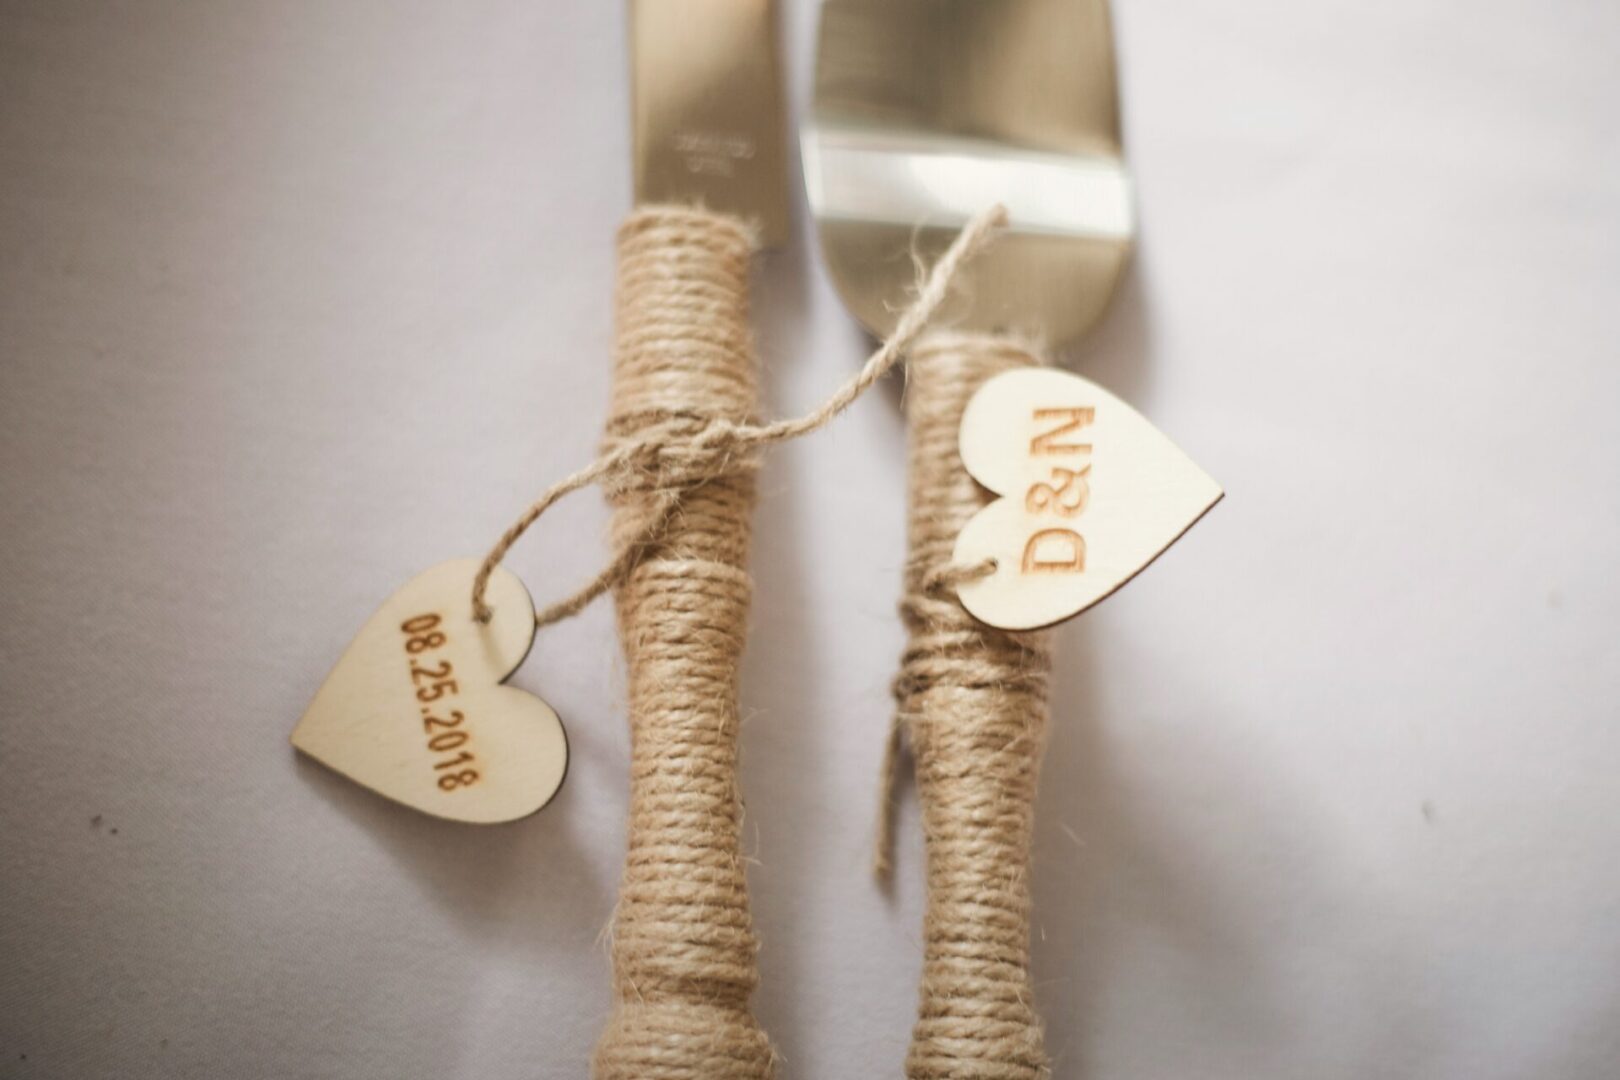 A couple of forks and spoons with twine wrapped around them.